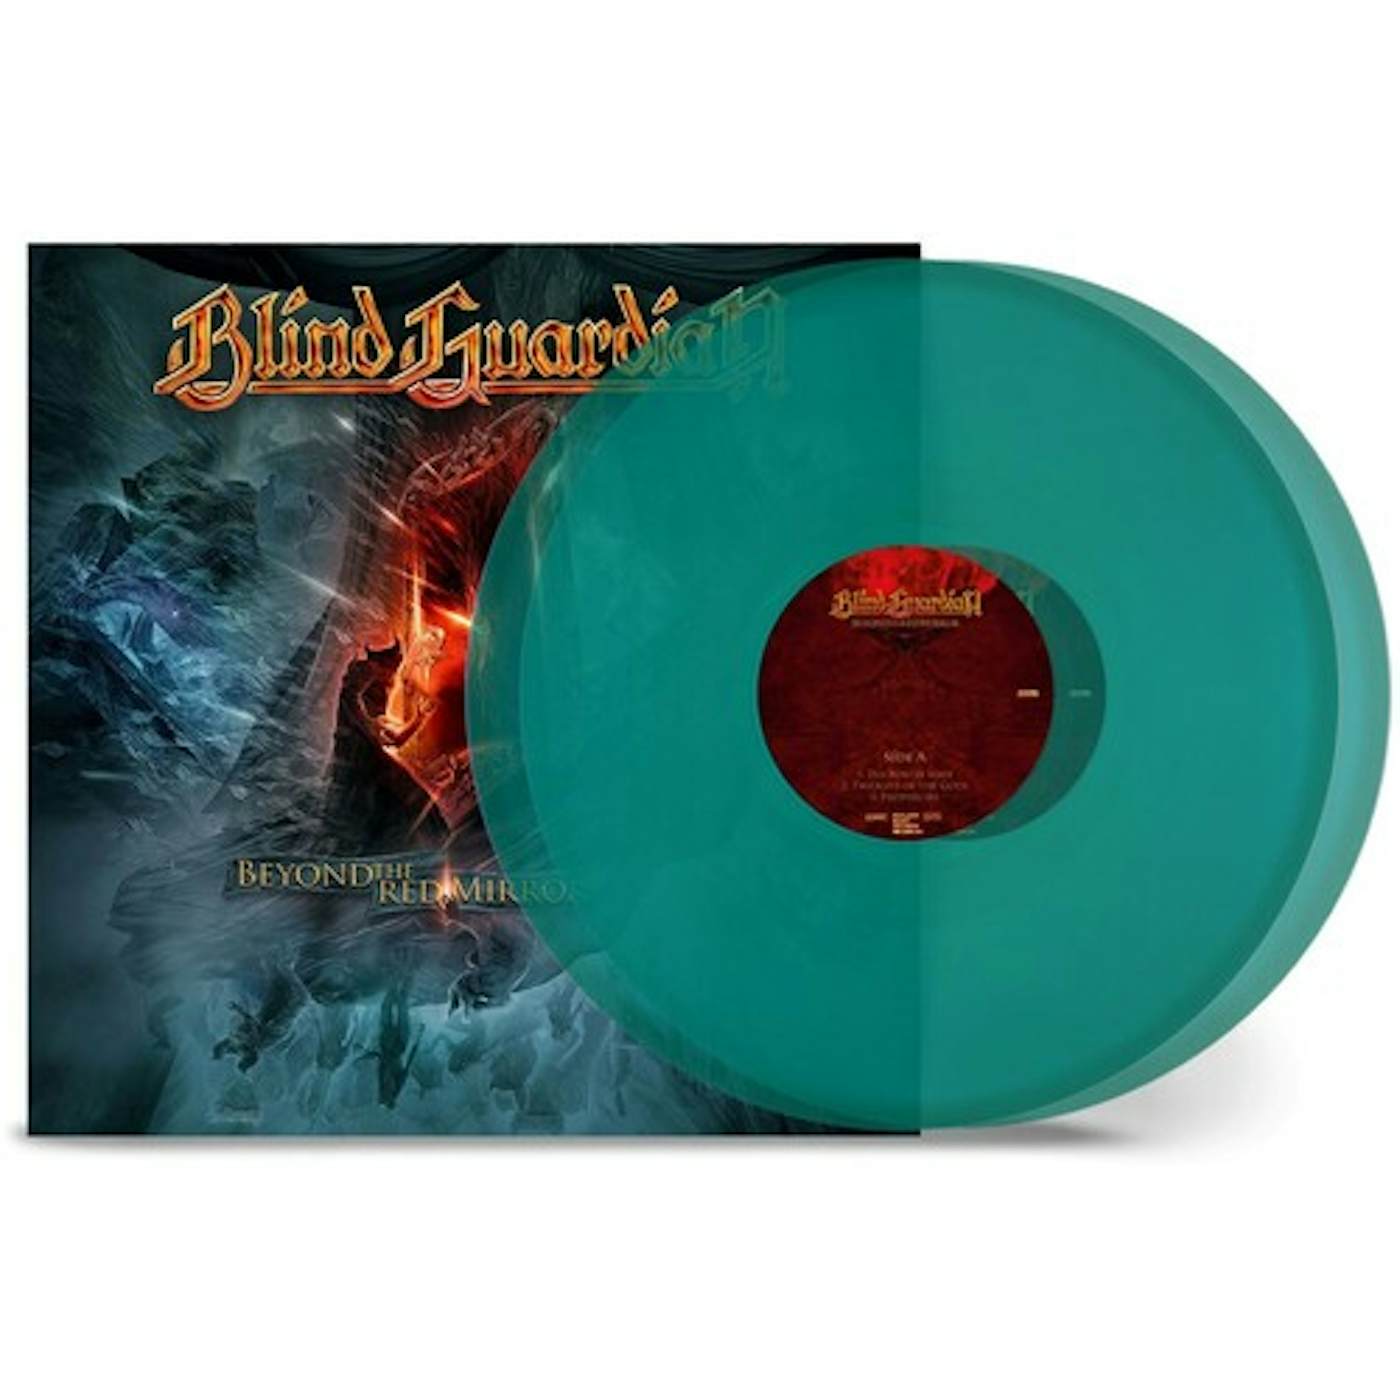 Blind Guardian Beyond The Red Mirror (Transparent Green) Vinyl Record